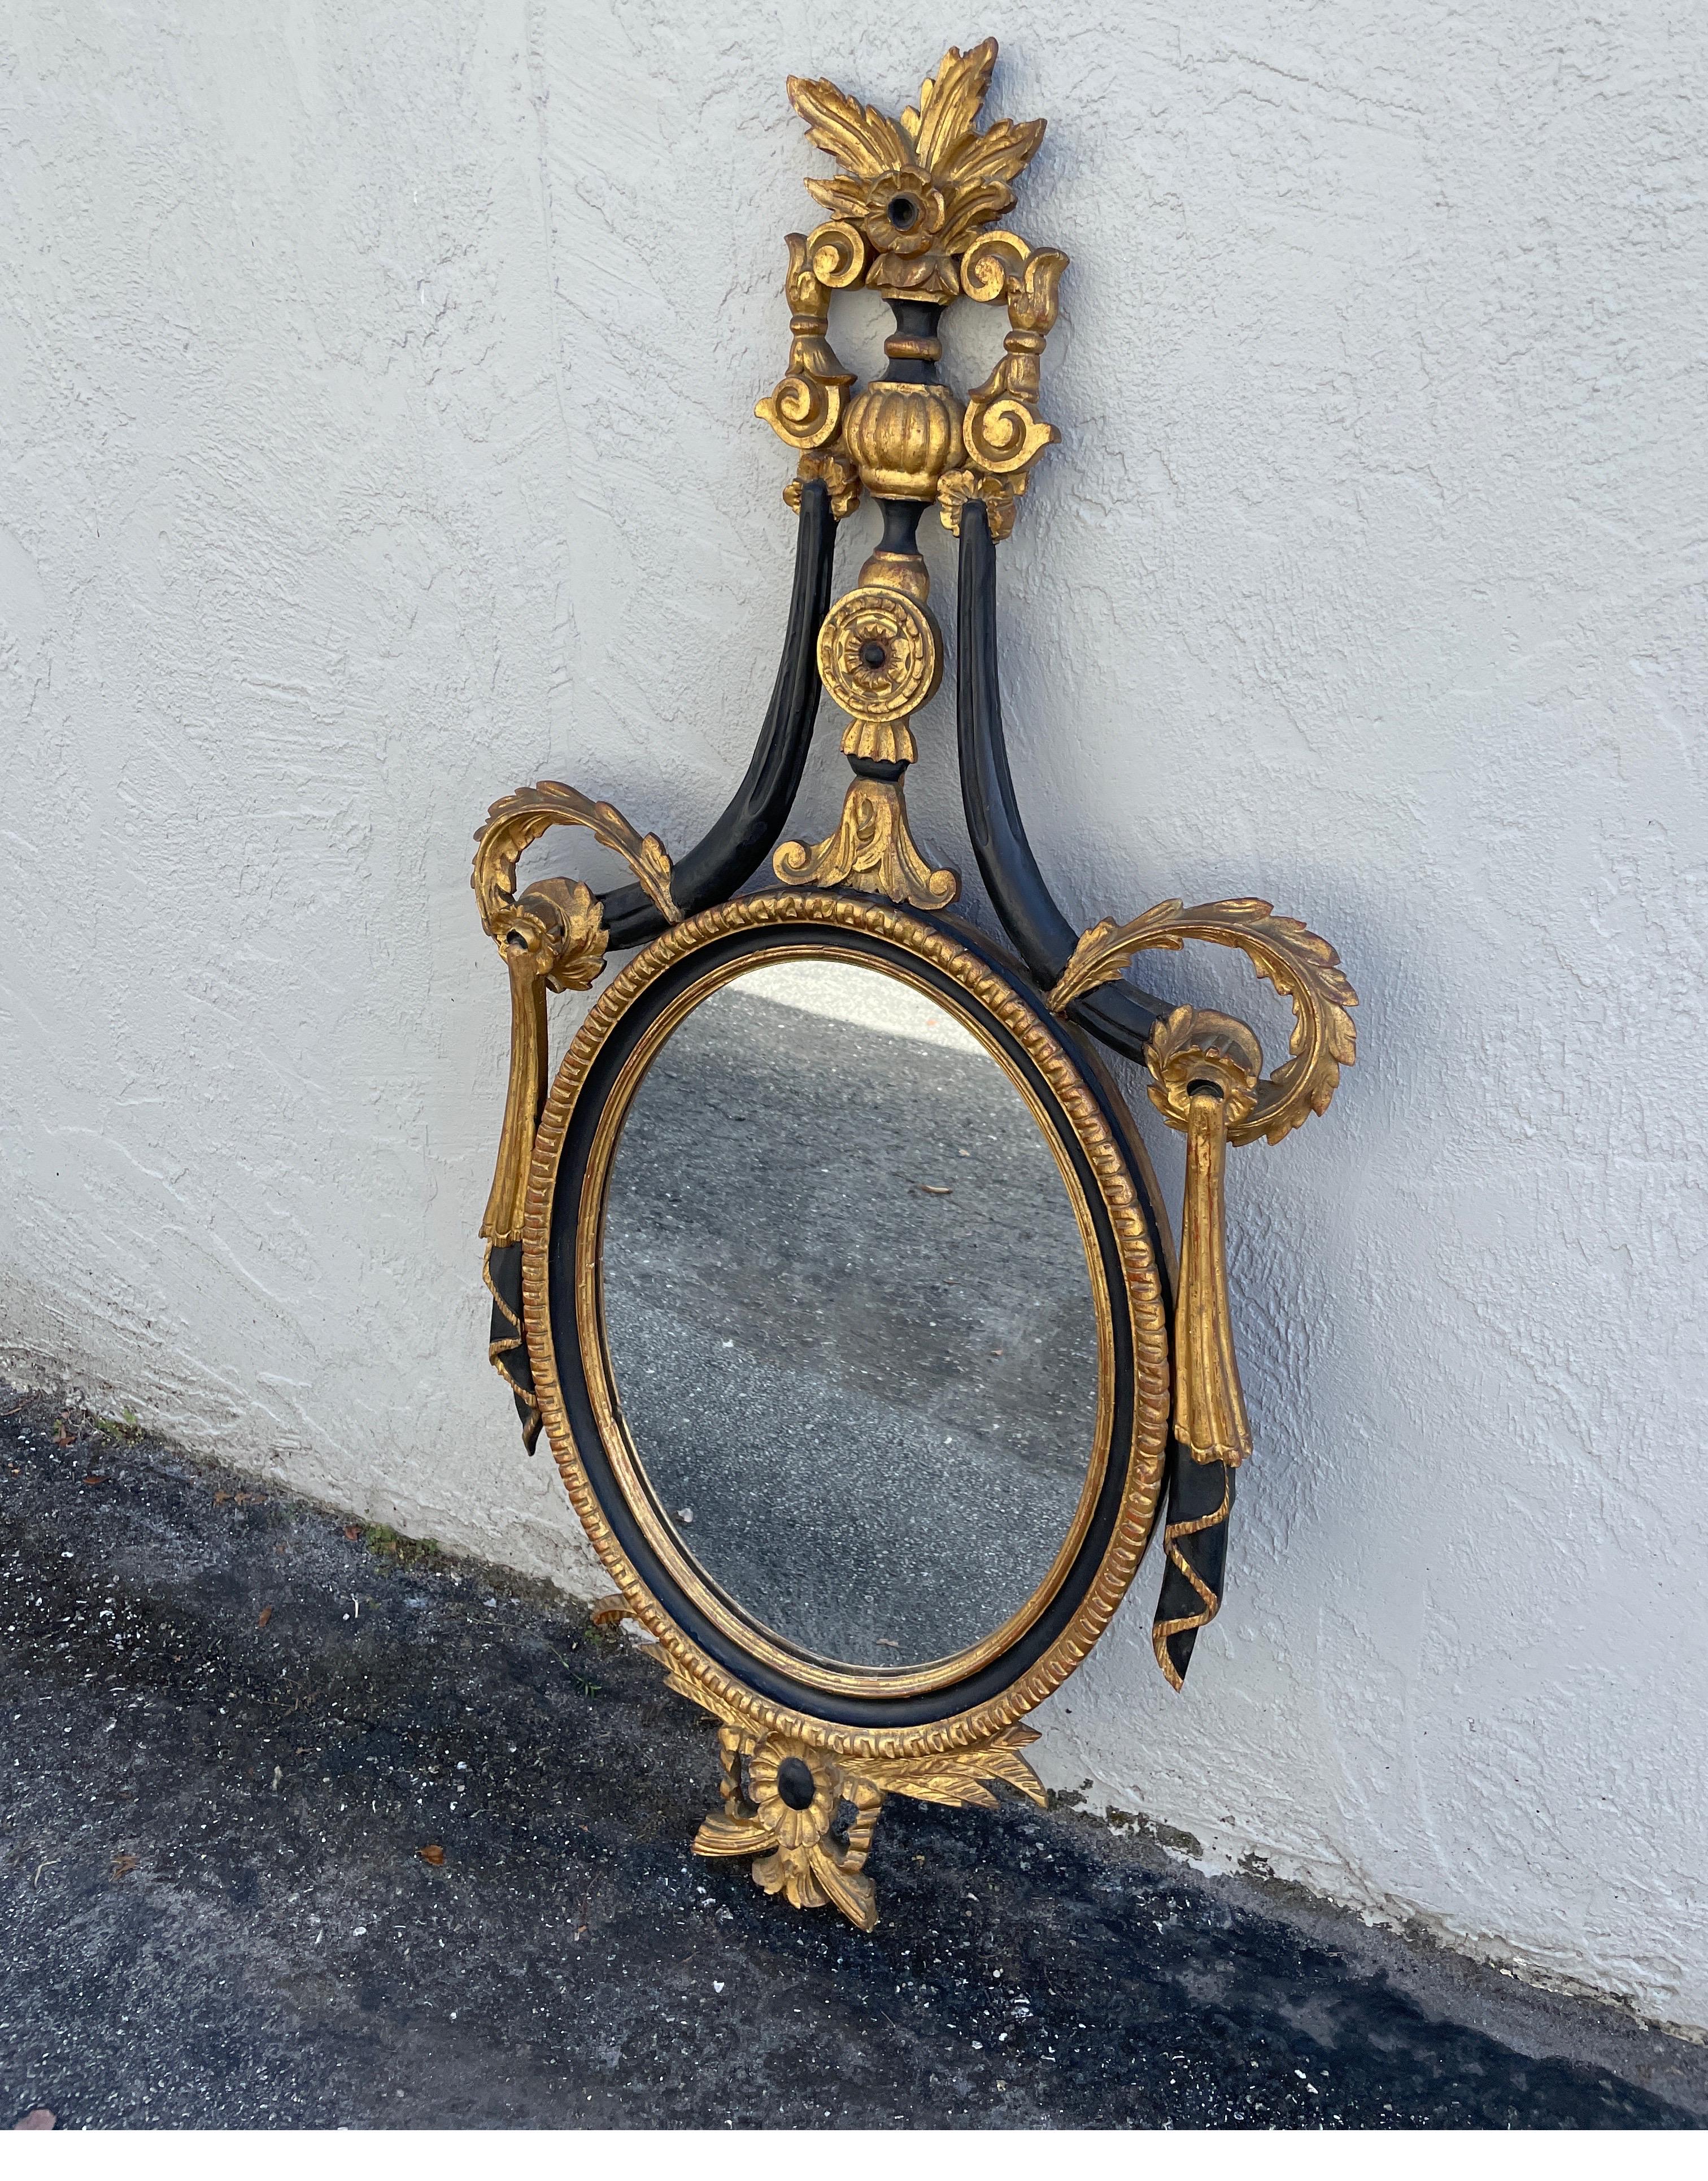 Hand carved, painted & gilded Swag mirror in the Neoclassical style by the Italian maker Palladio.